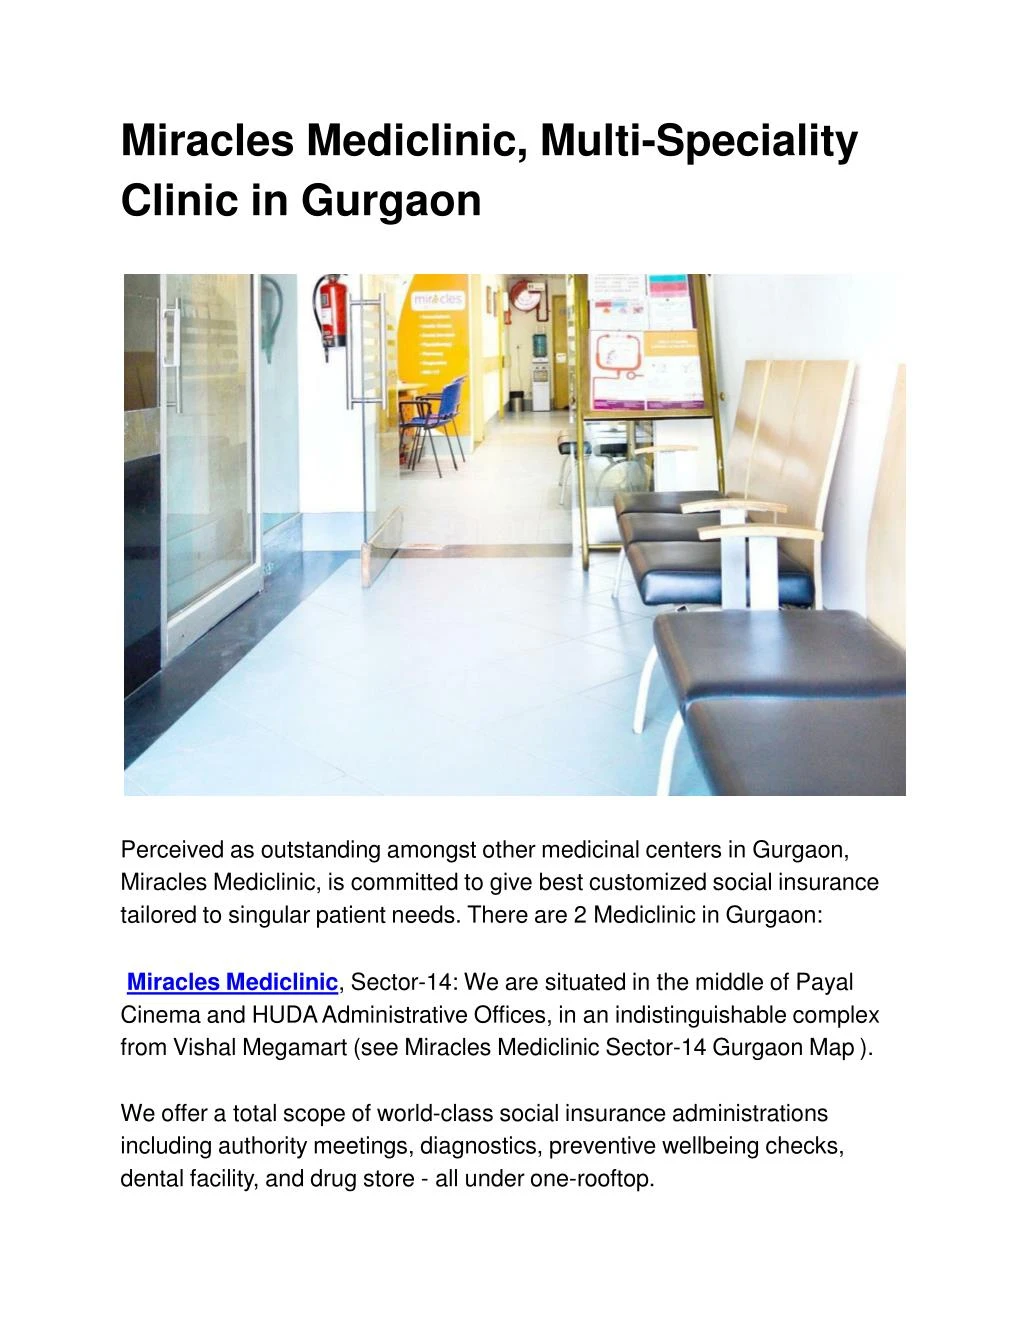 miracles mediclinic multi speciality clinic in gurgaon